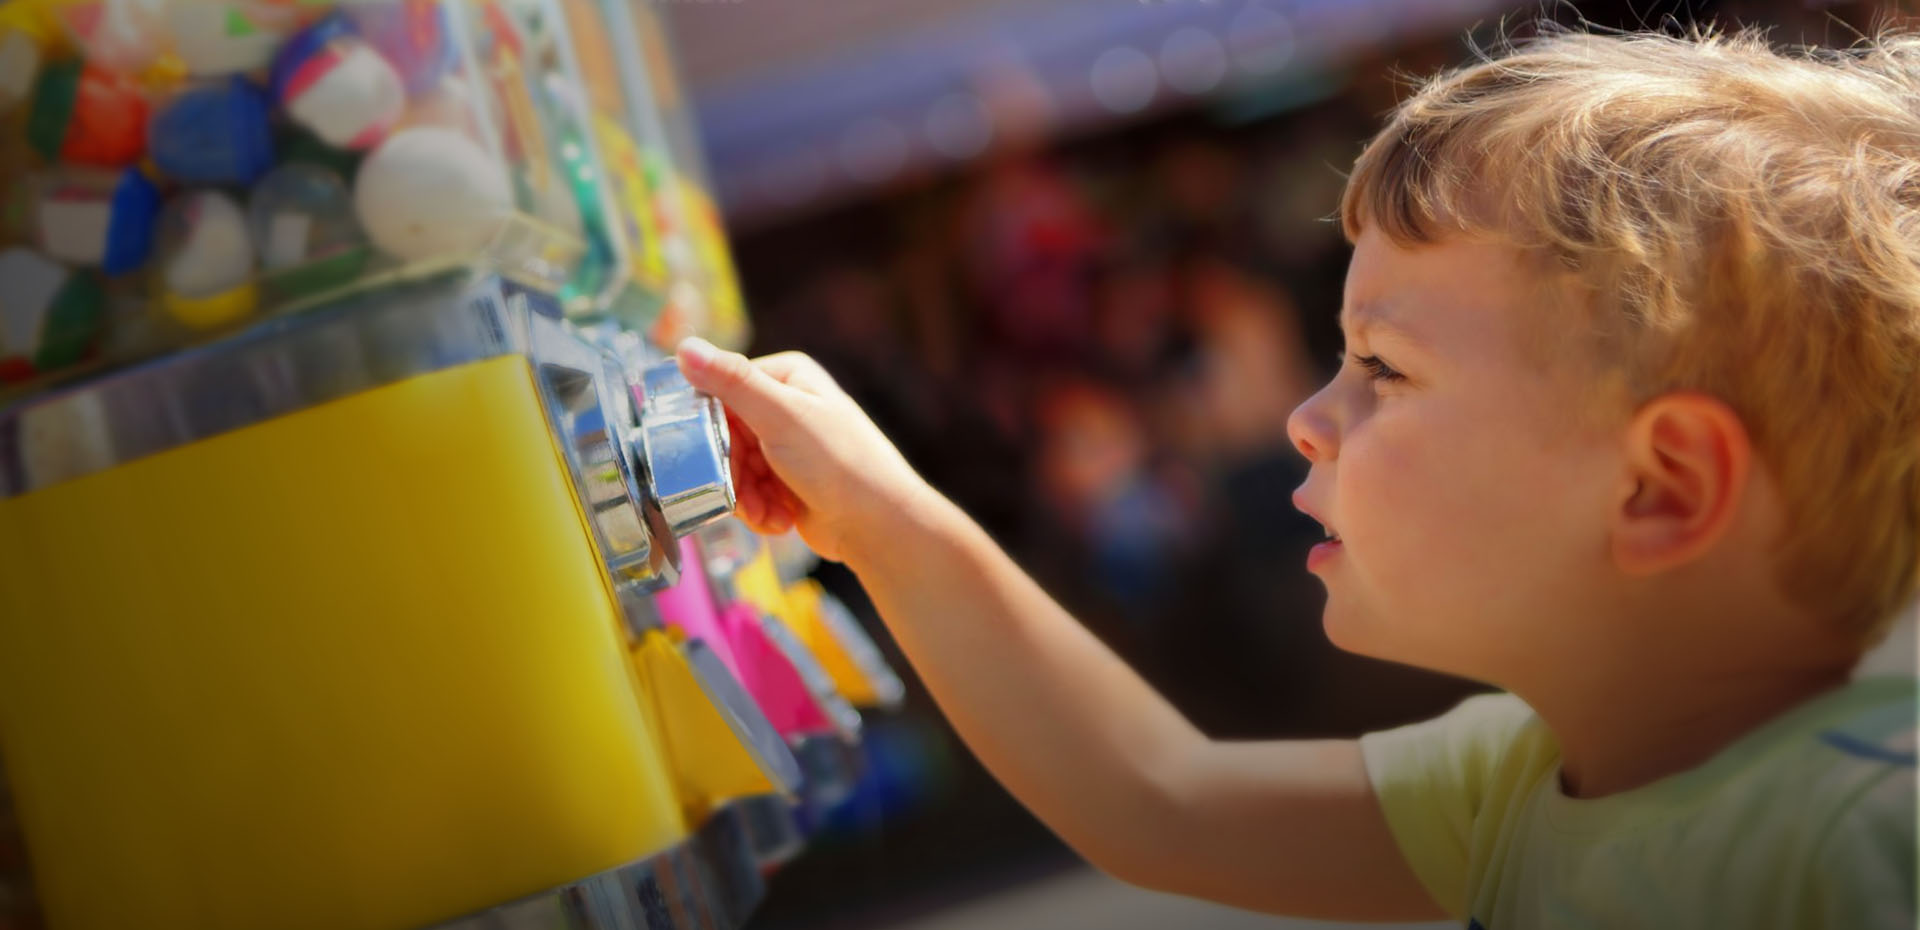 Installers Of Toys Vending Machines For Shopping Centres Leicester